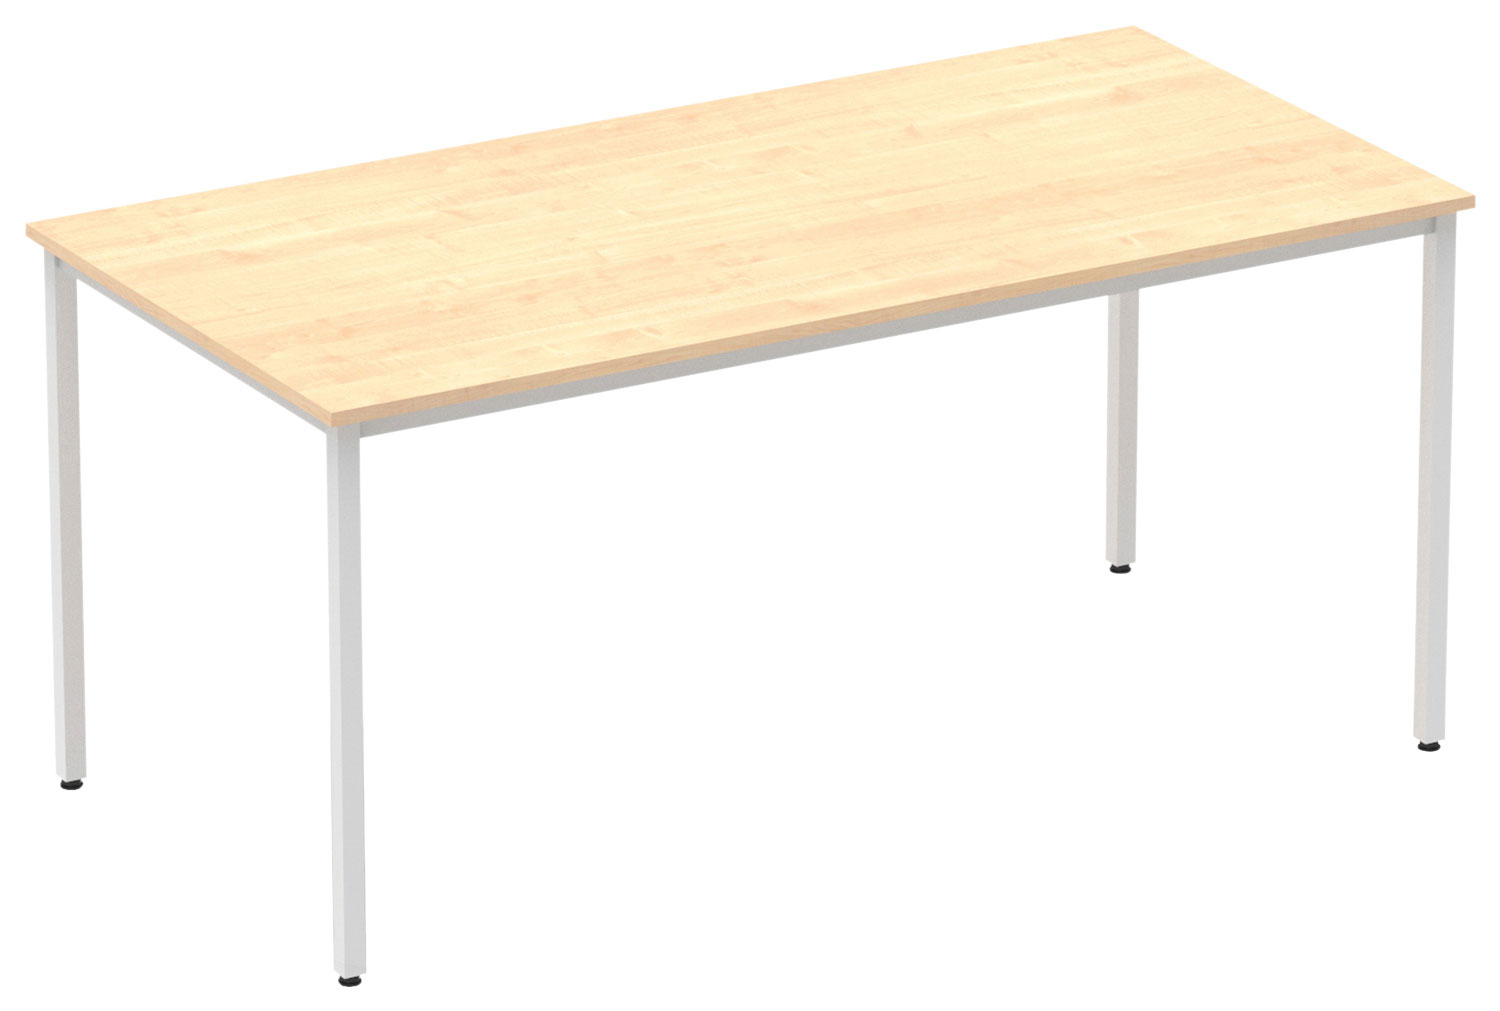 All Maple Rectangular Meeting Table (Square Legs), 160wx80dx73h (cm)